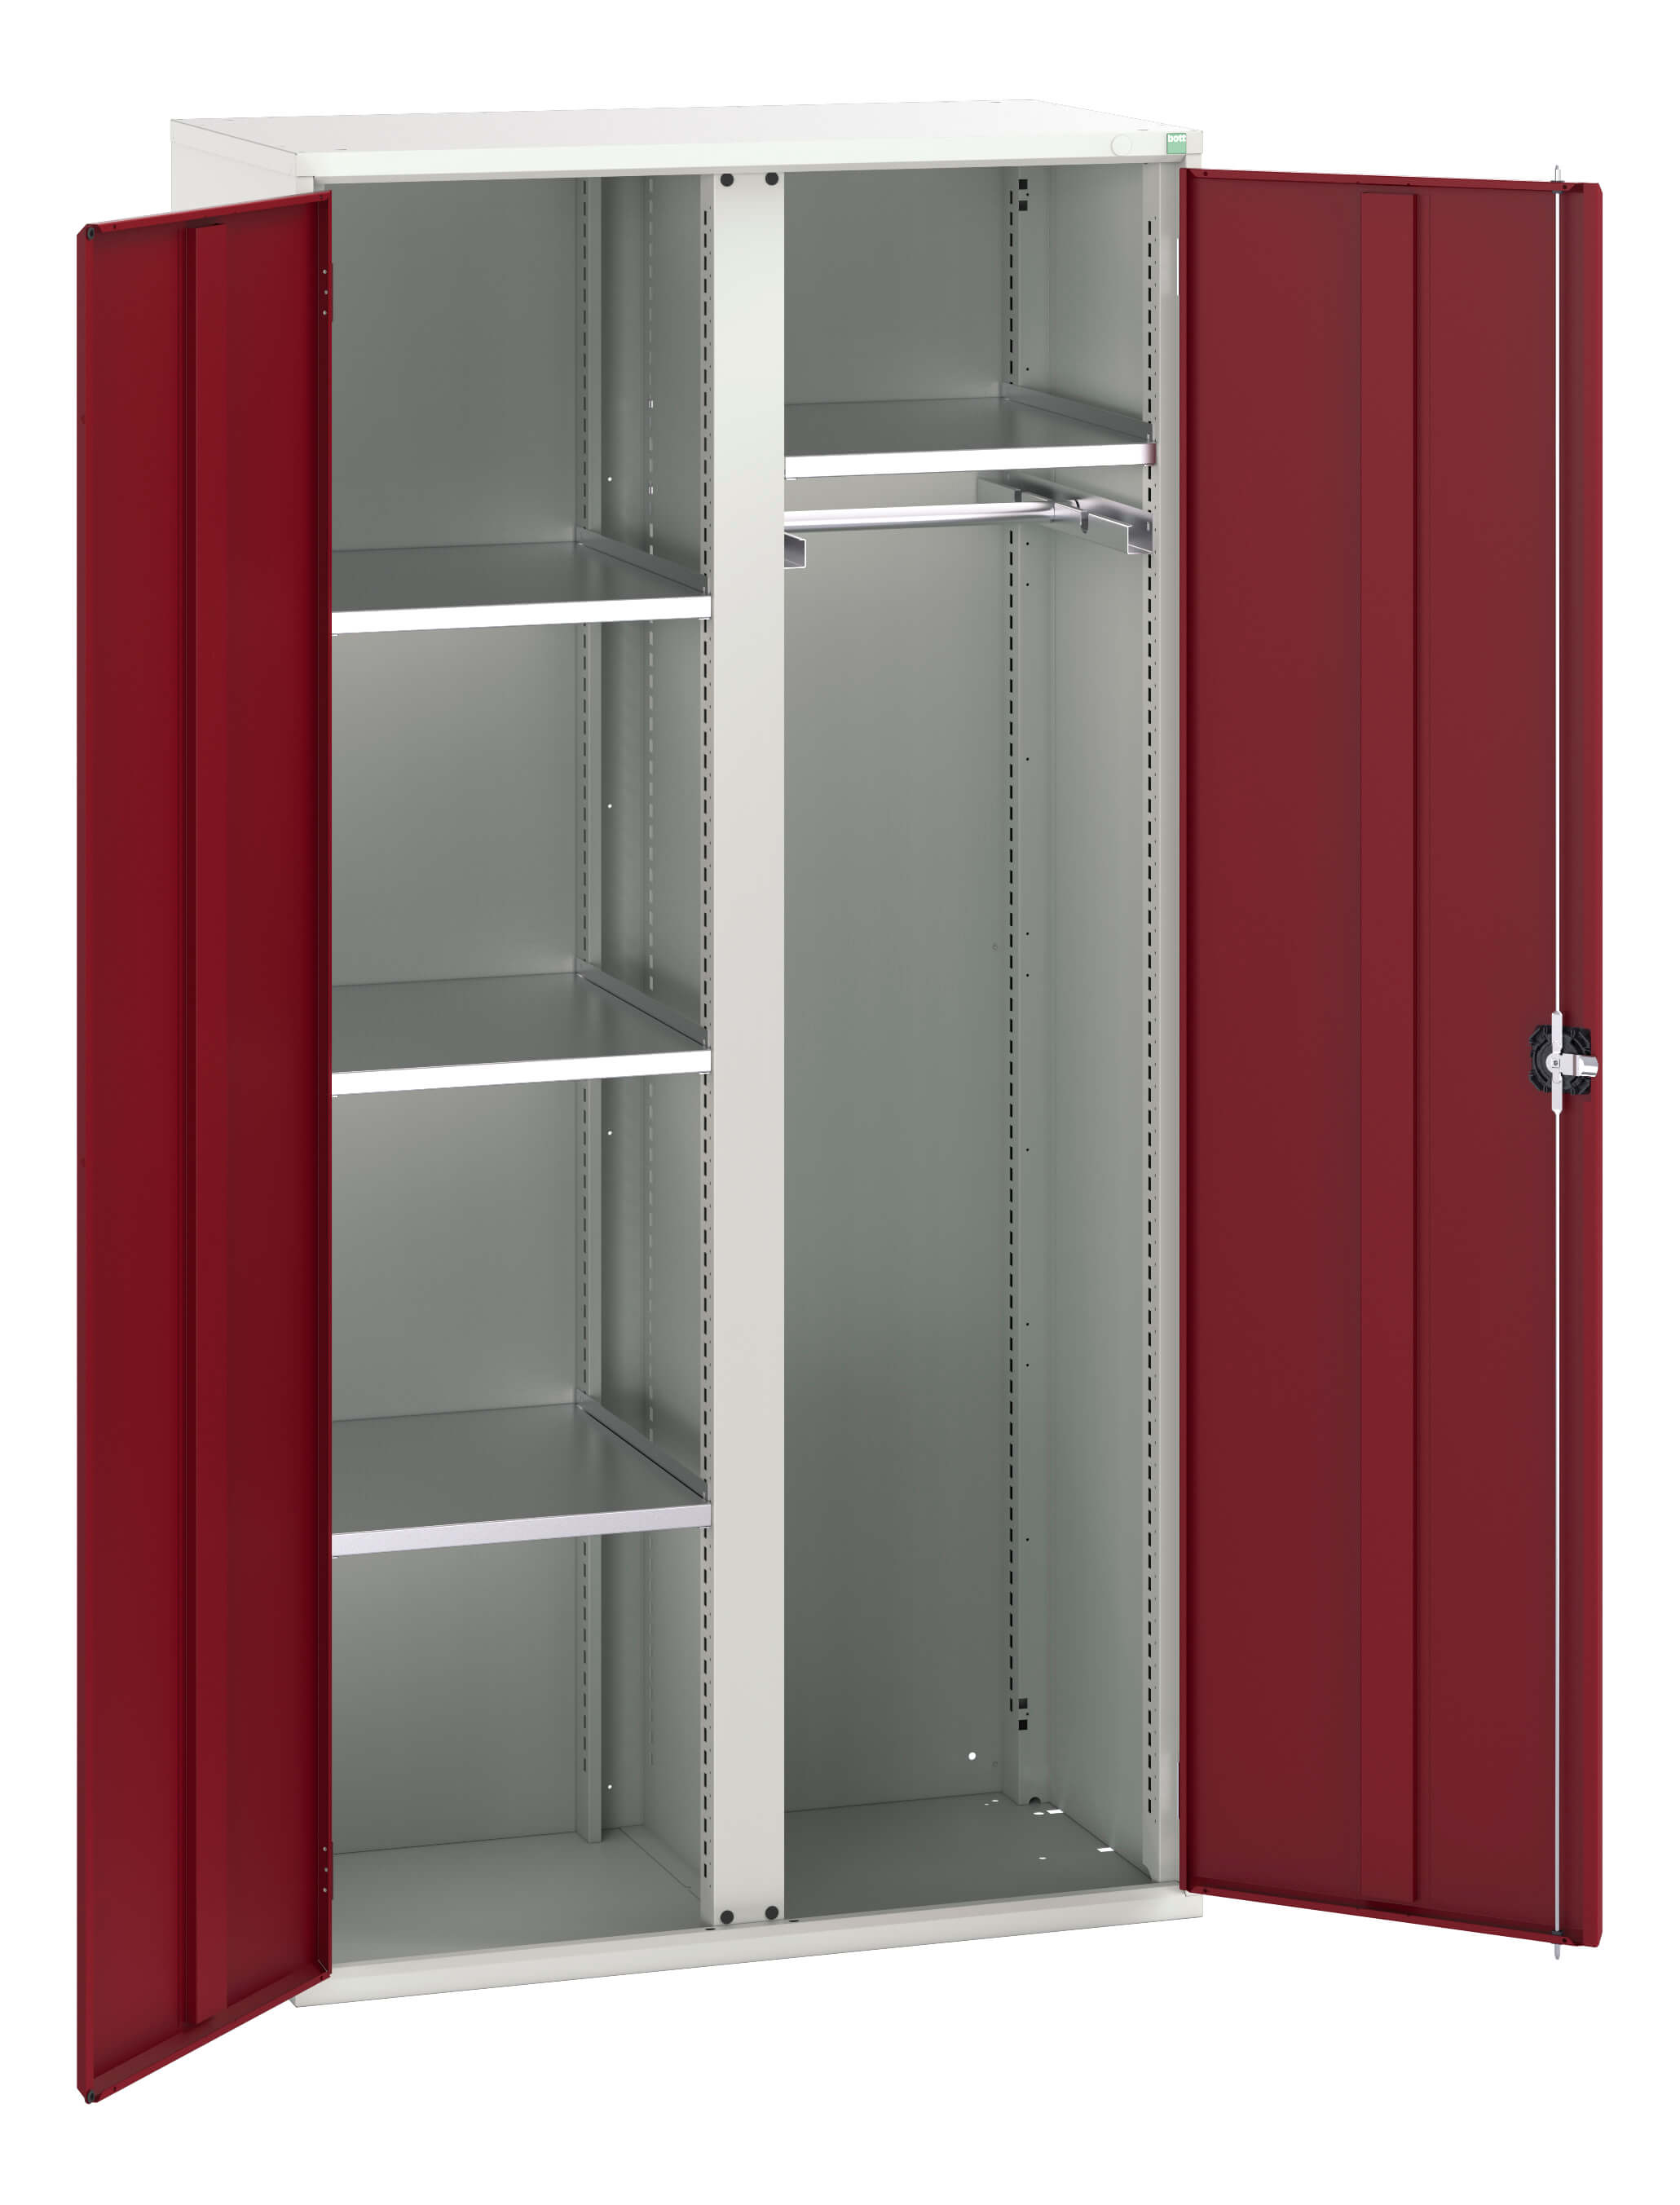 Bott Verso Ppe / Janitorial Kitted Cupboard With Vertical Partition - 16926579.24